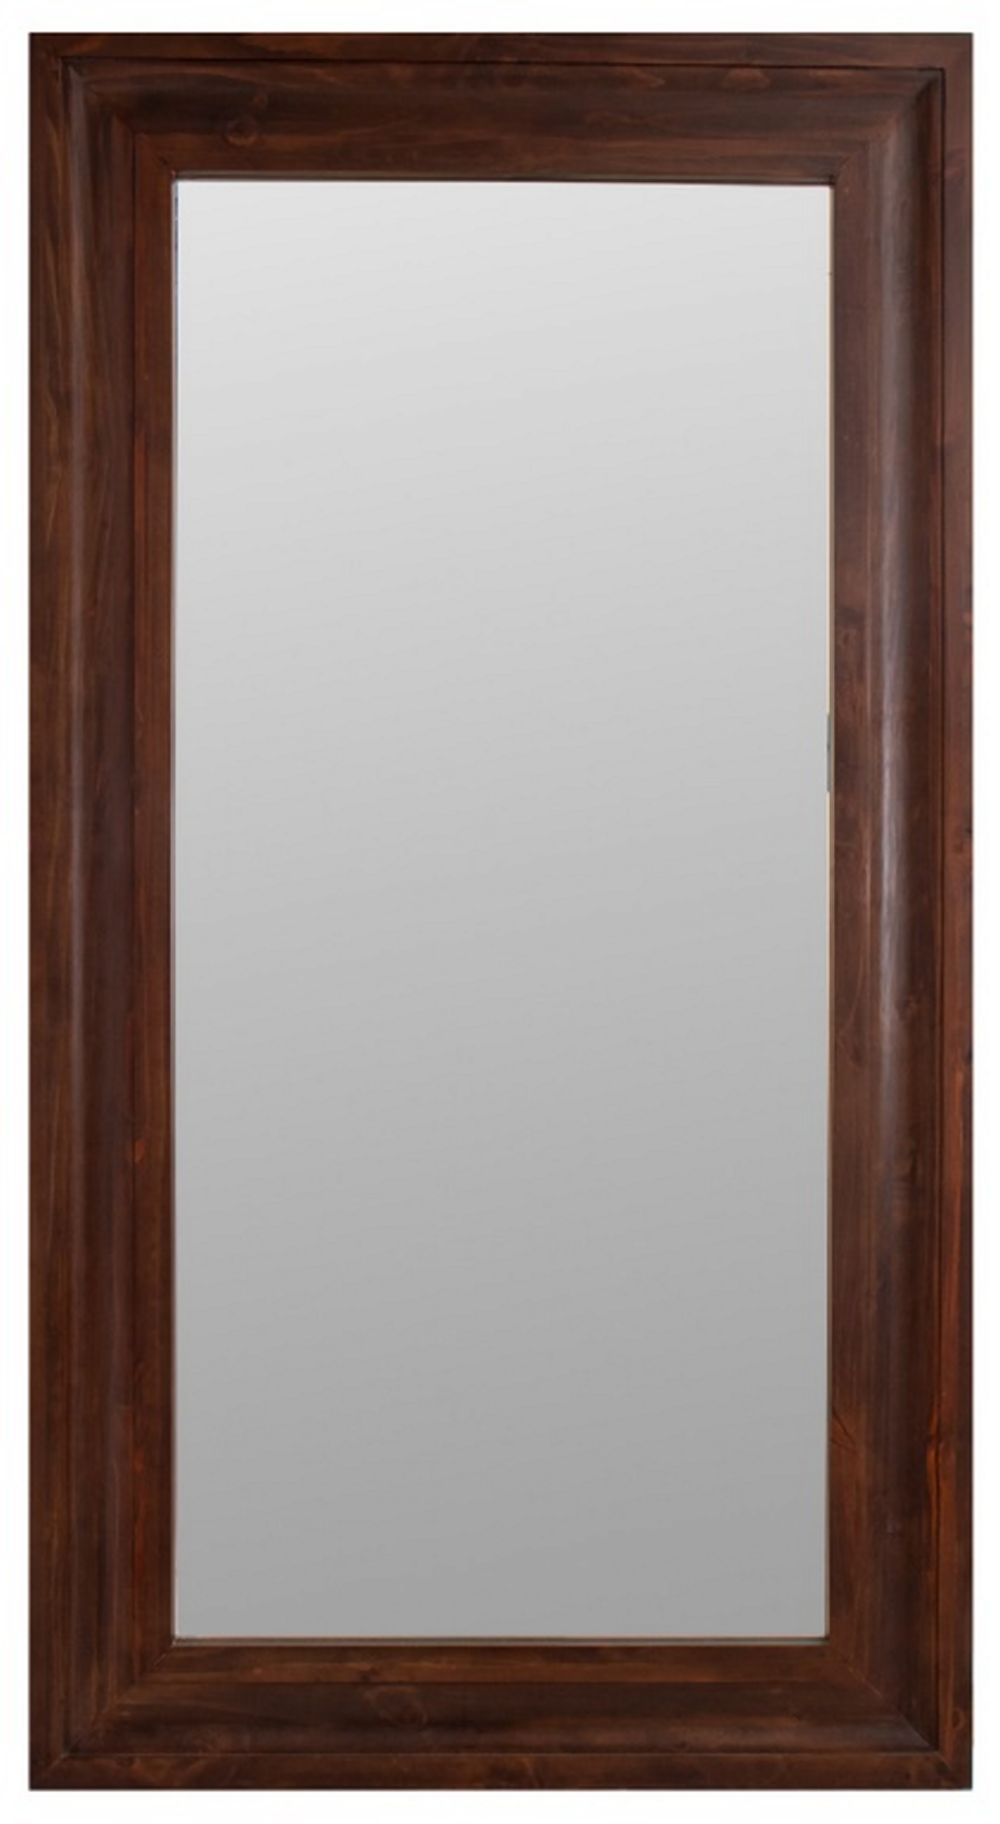 MONUMENTAL OGEE STYLE WOODEN BEVELED